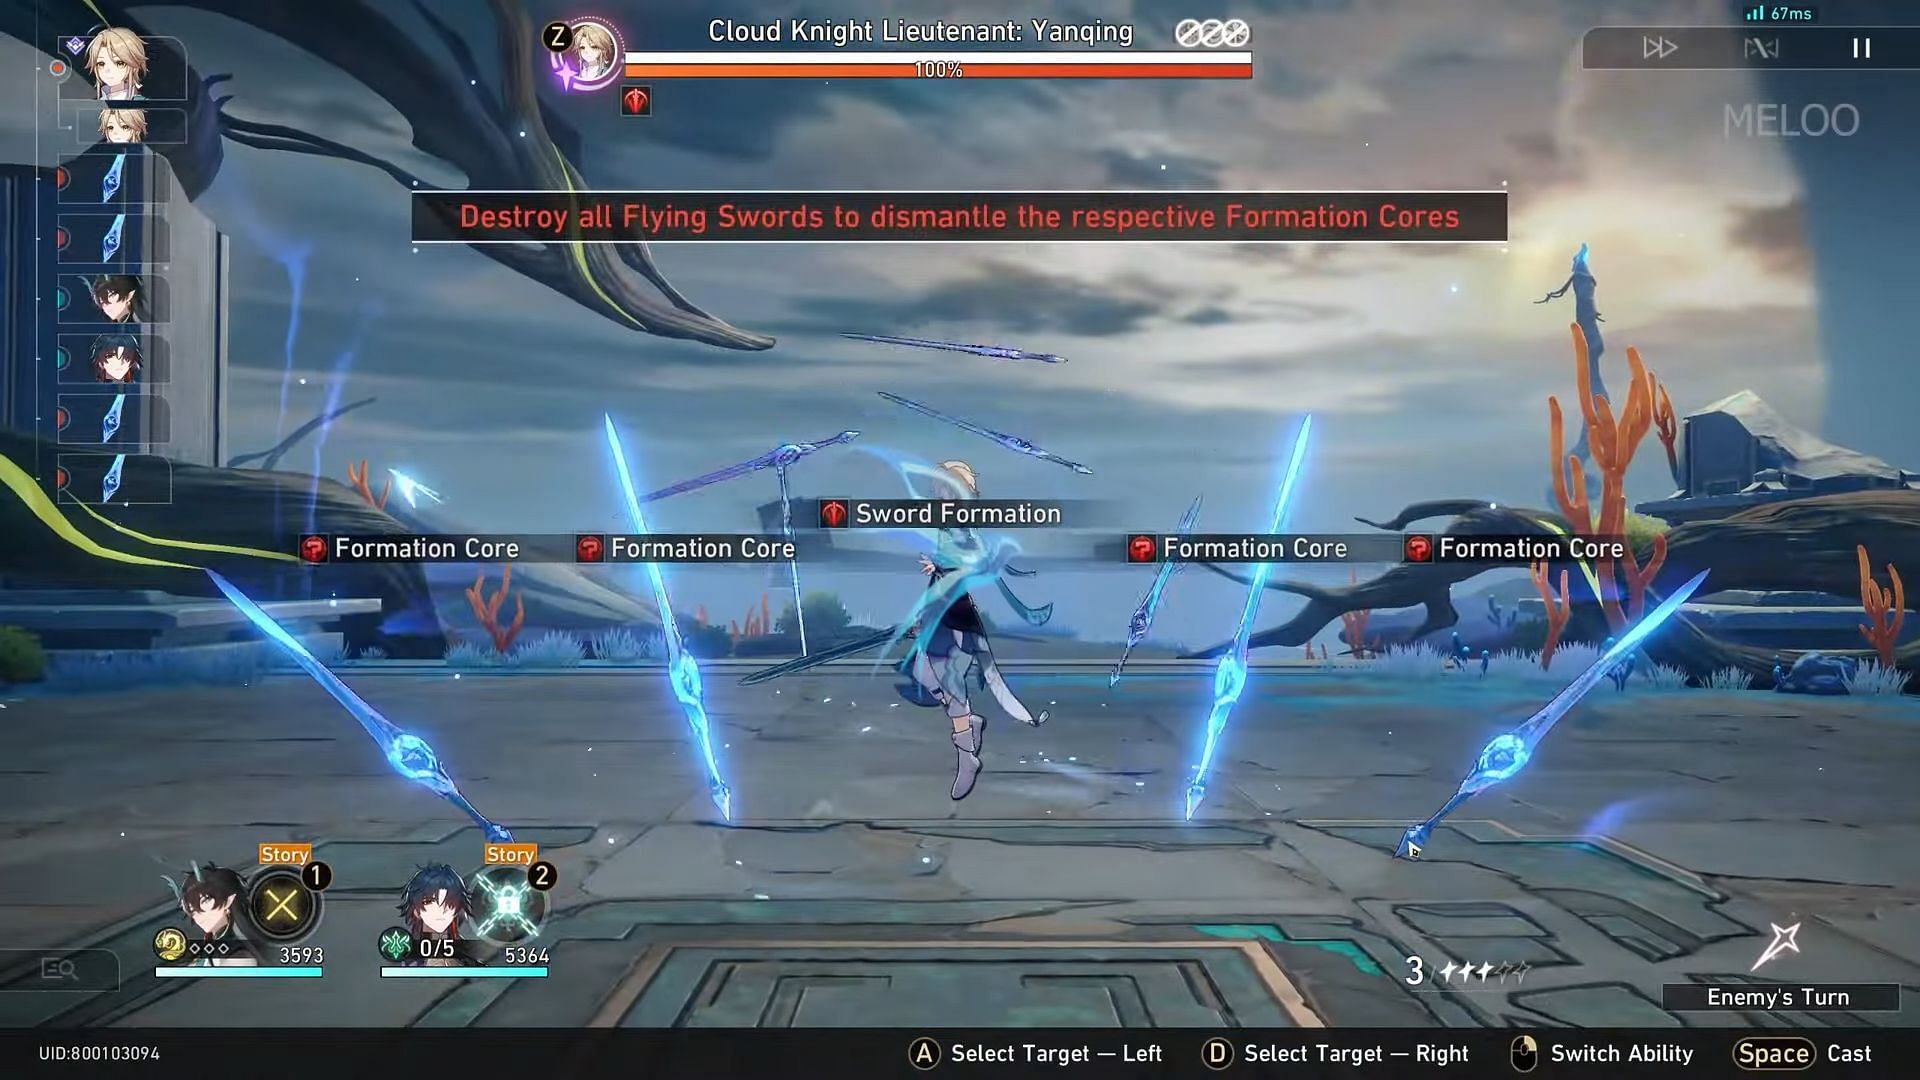 Yanqing unleashes his Sword Formation (Image via YouTube/MELOO)